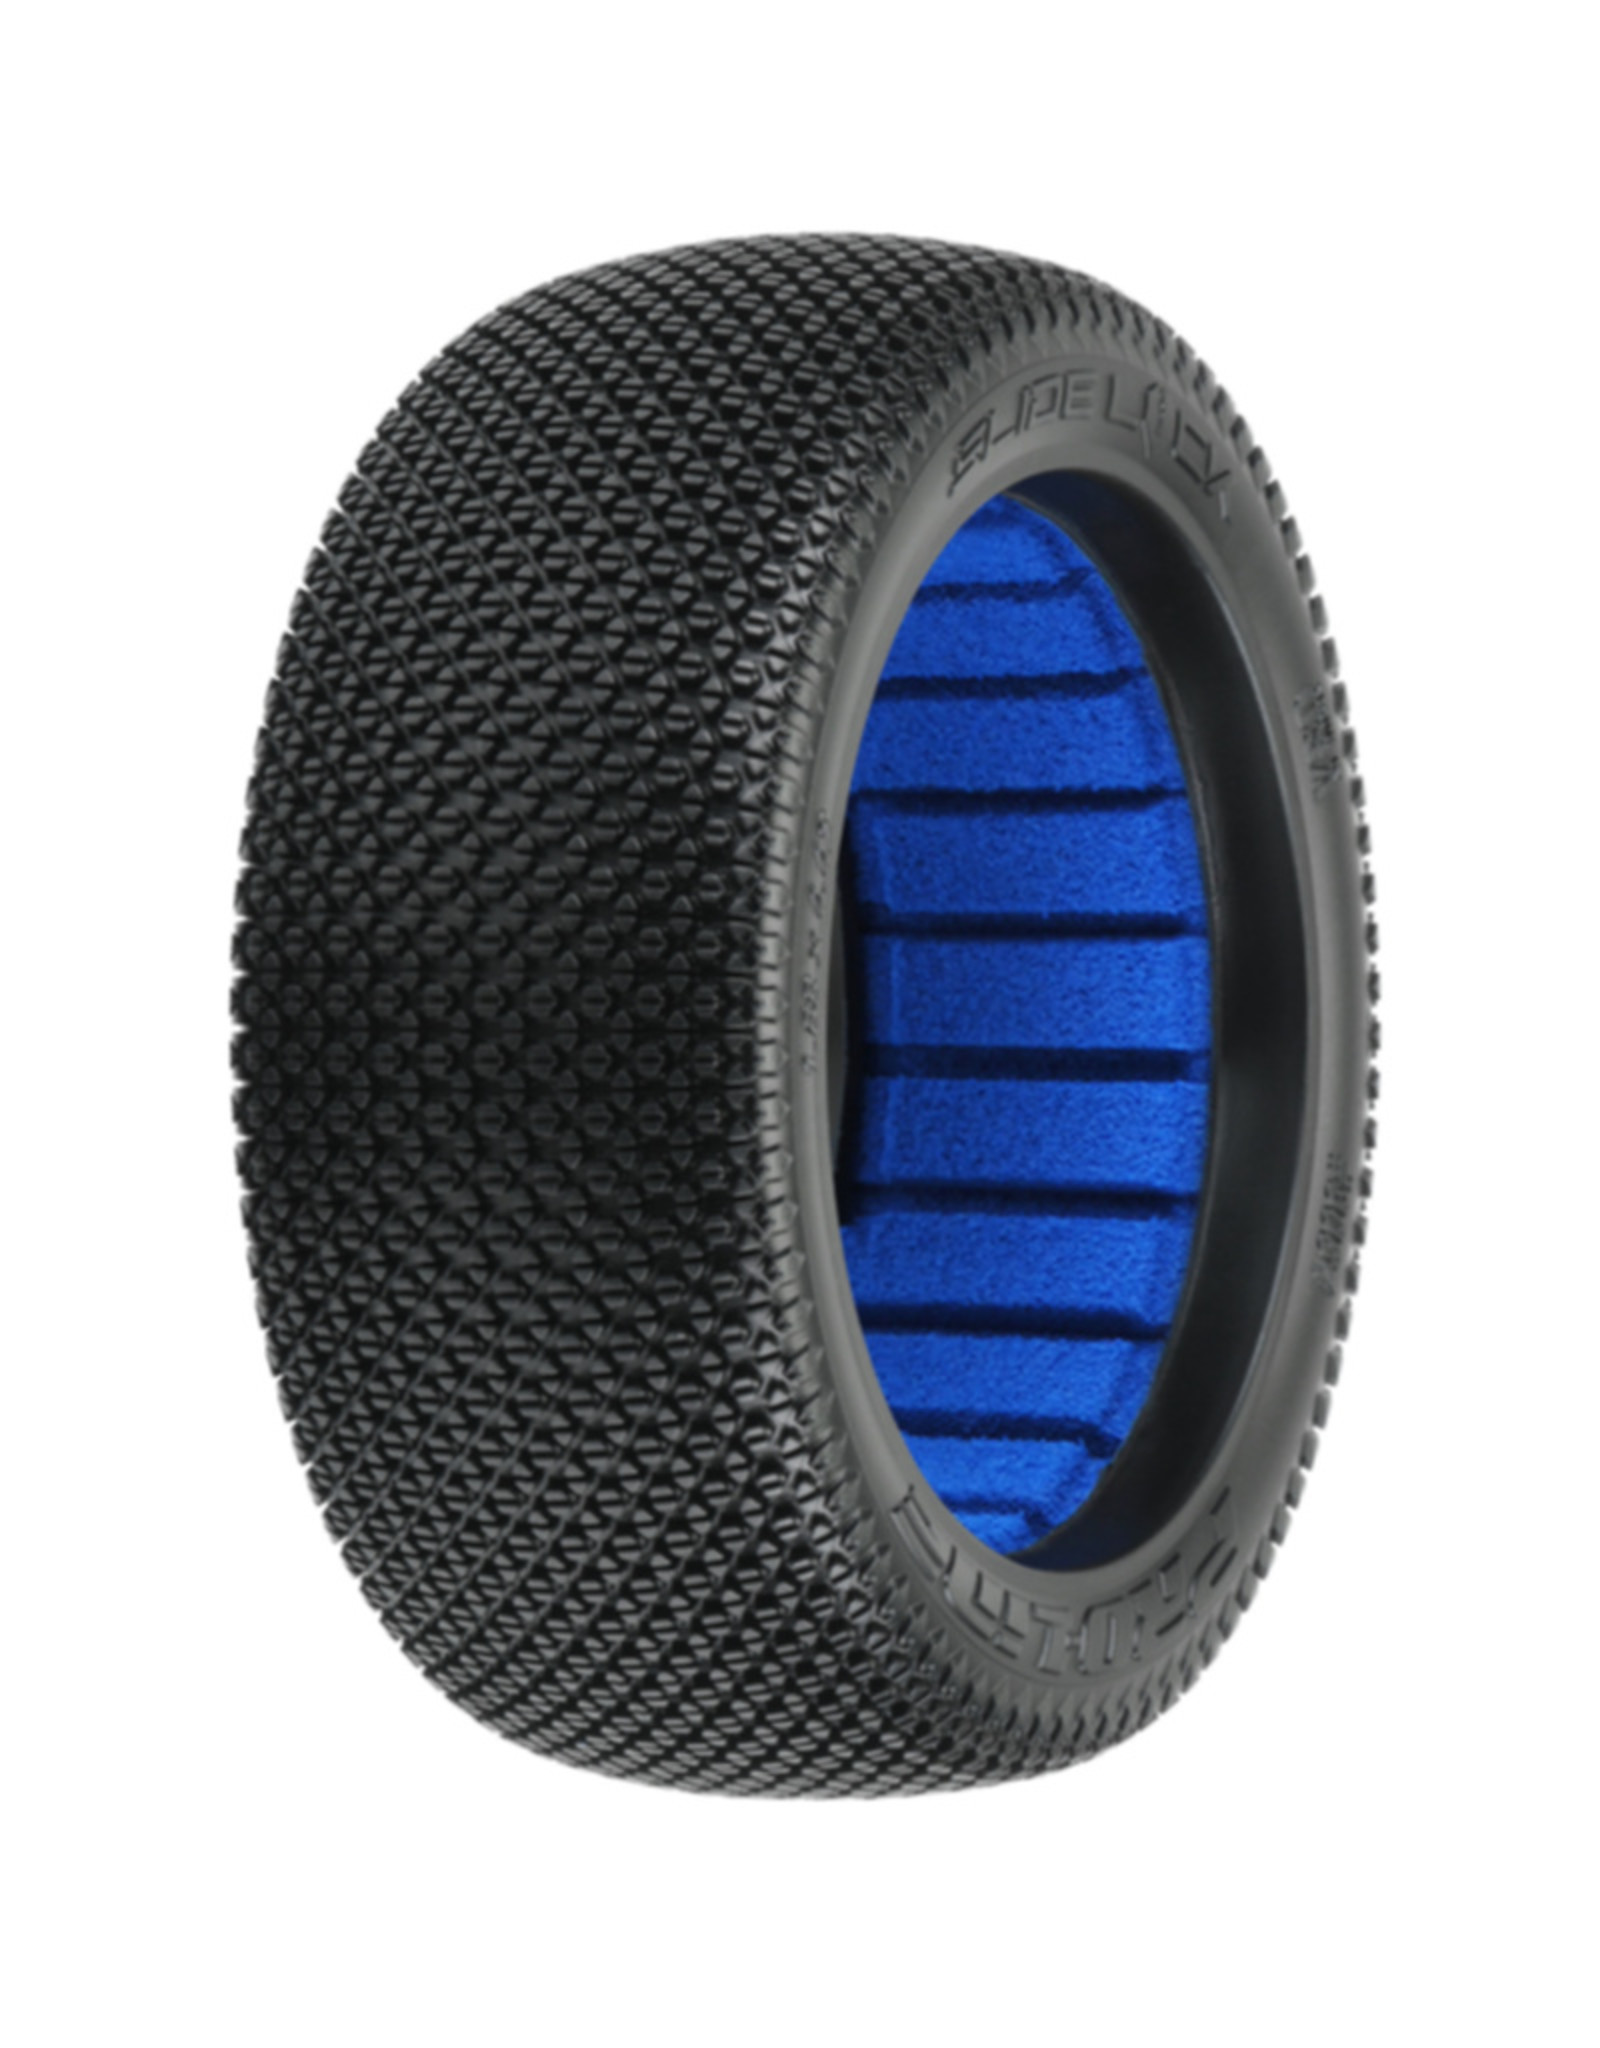 Pro-Line Racing PRO9064203 1/8 Slide Lock S3 Soft Off-Road Tire:Buggy (2)